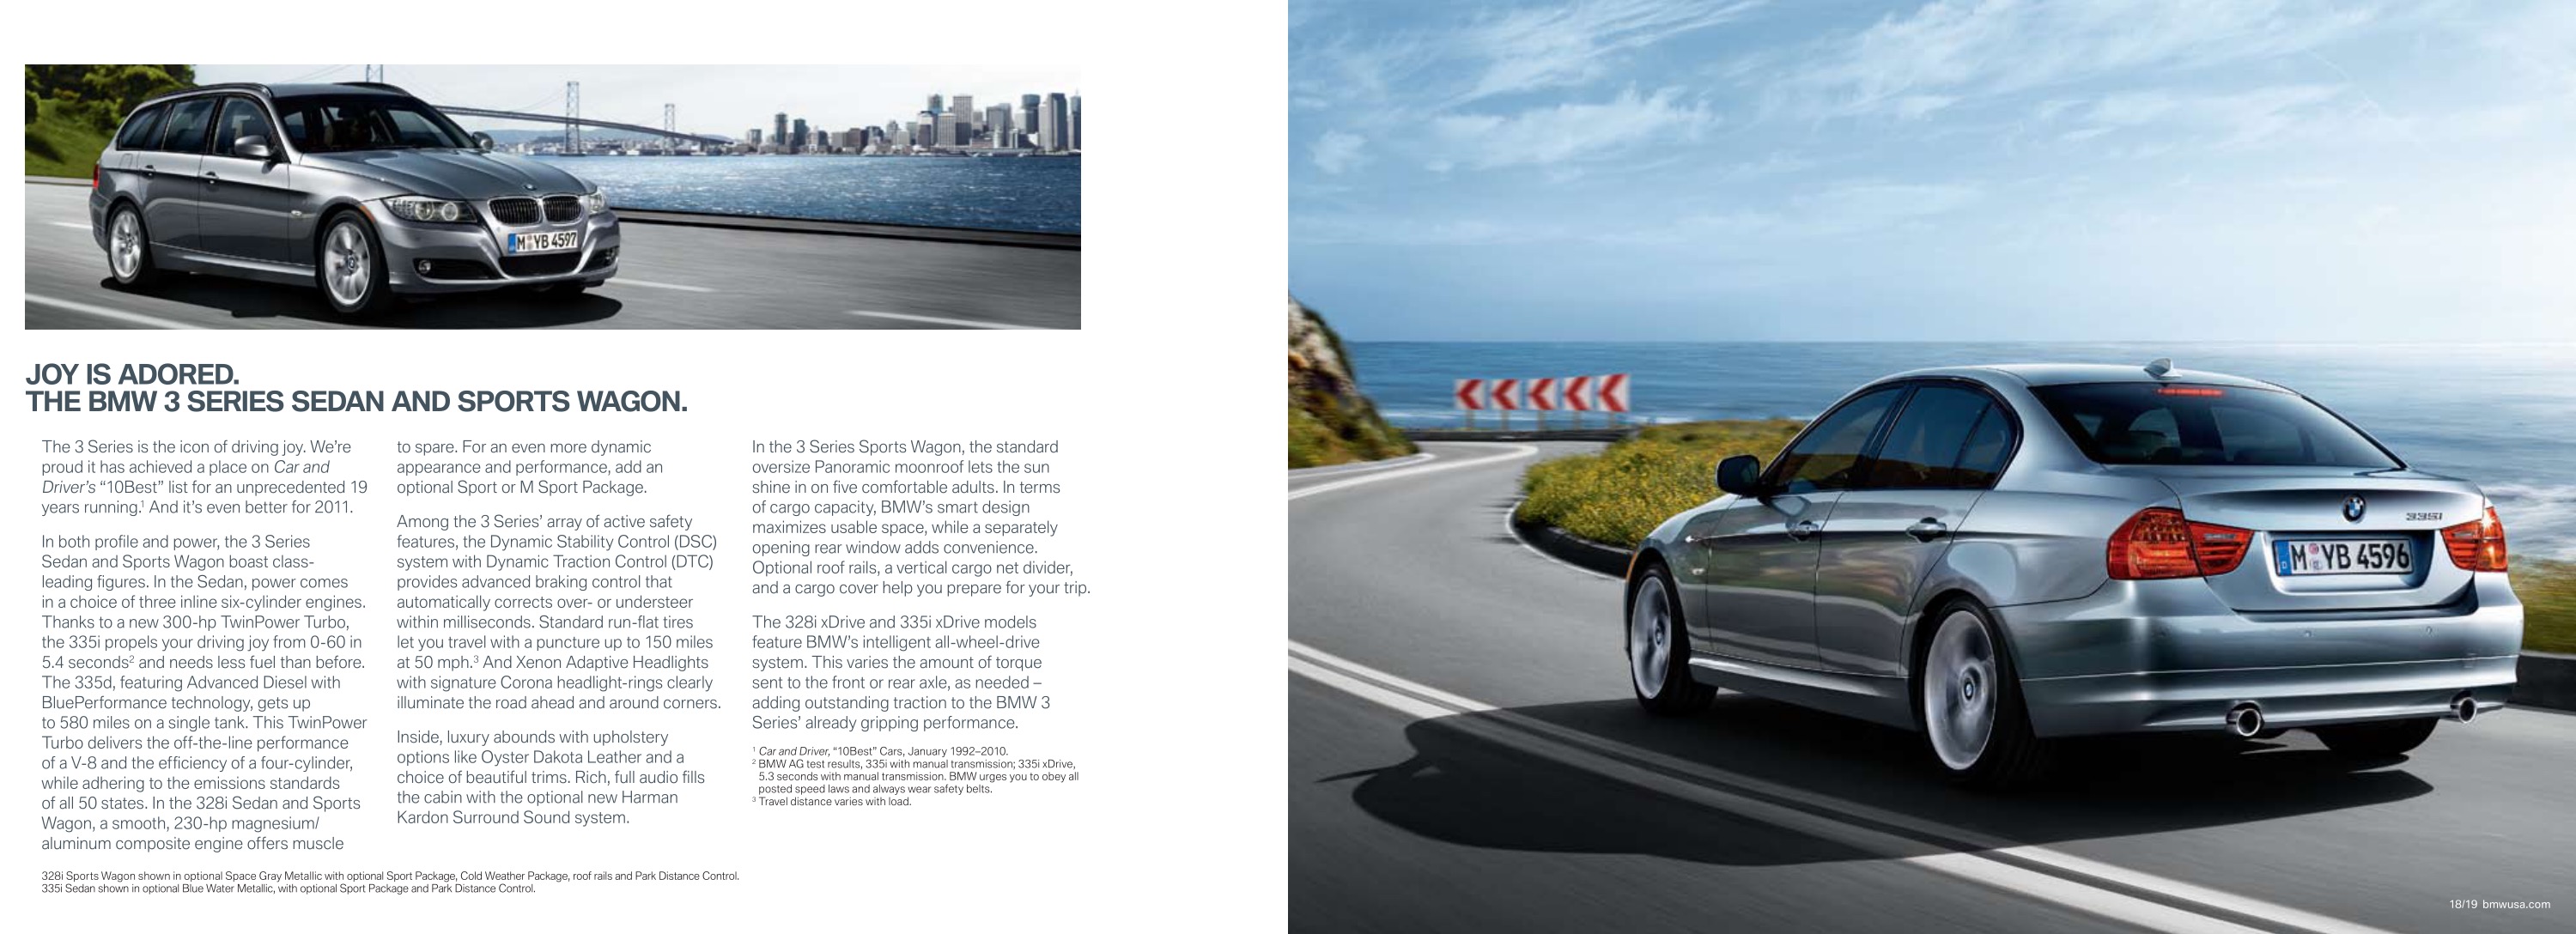 2011 BMW Full-Line Brochure Page 16